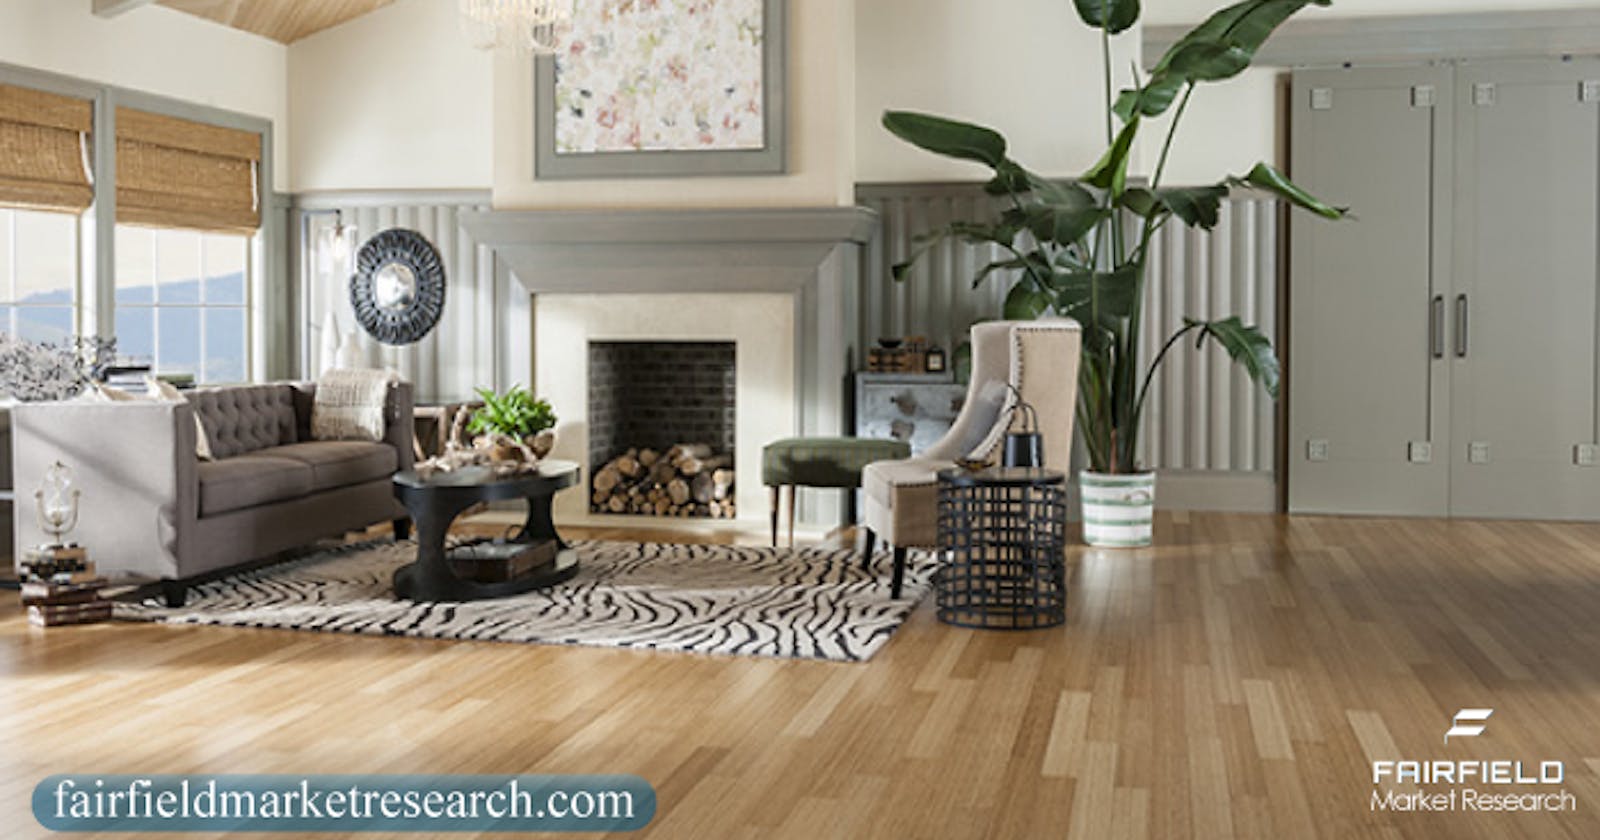 Global Interior Finish Market Soars with a 7% CAGR, Aiming to Exceed US$10 Billion by 2030